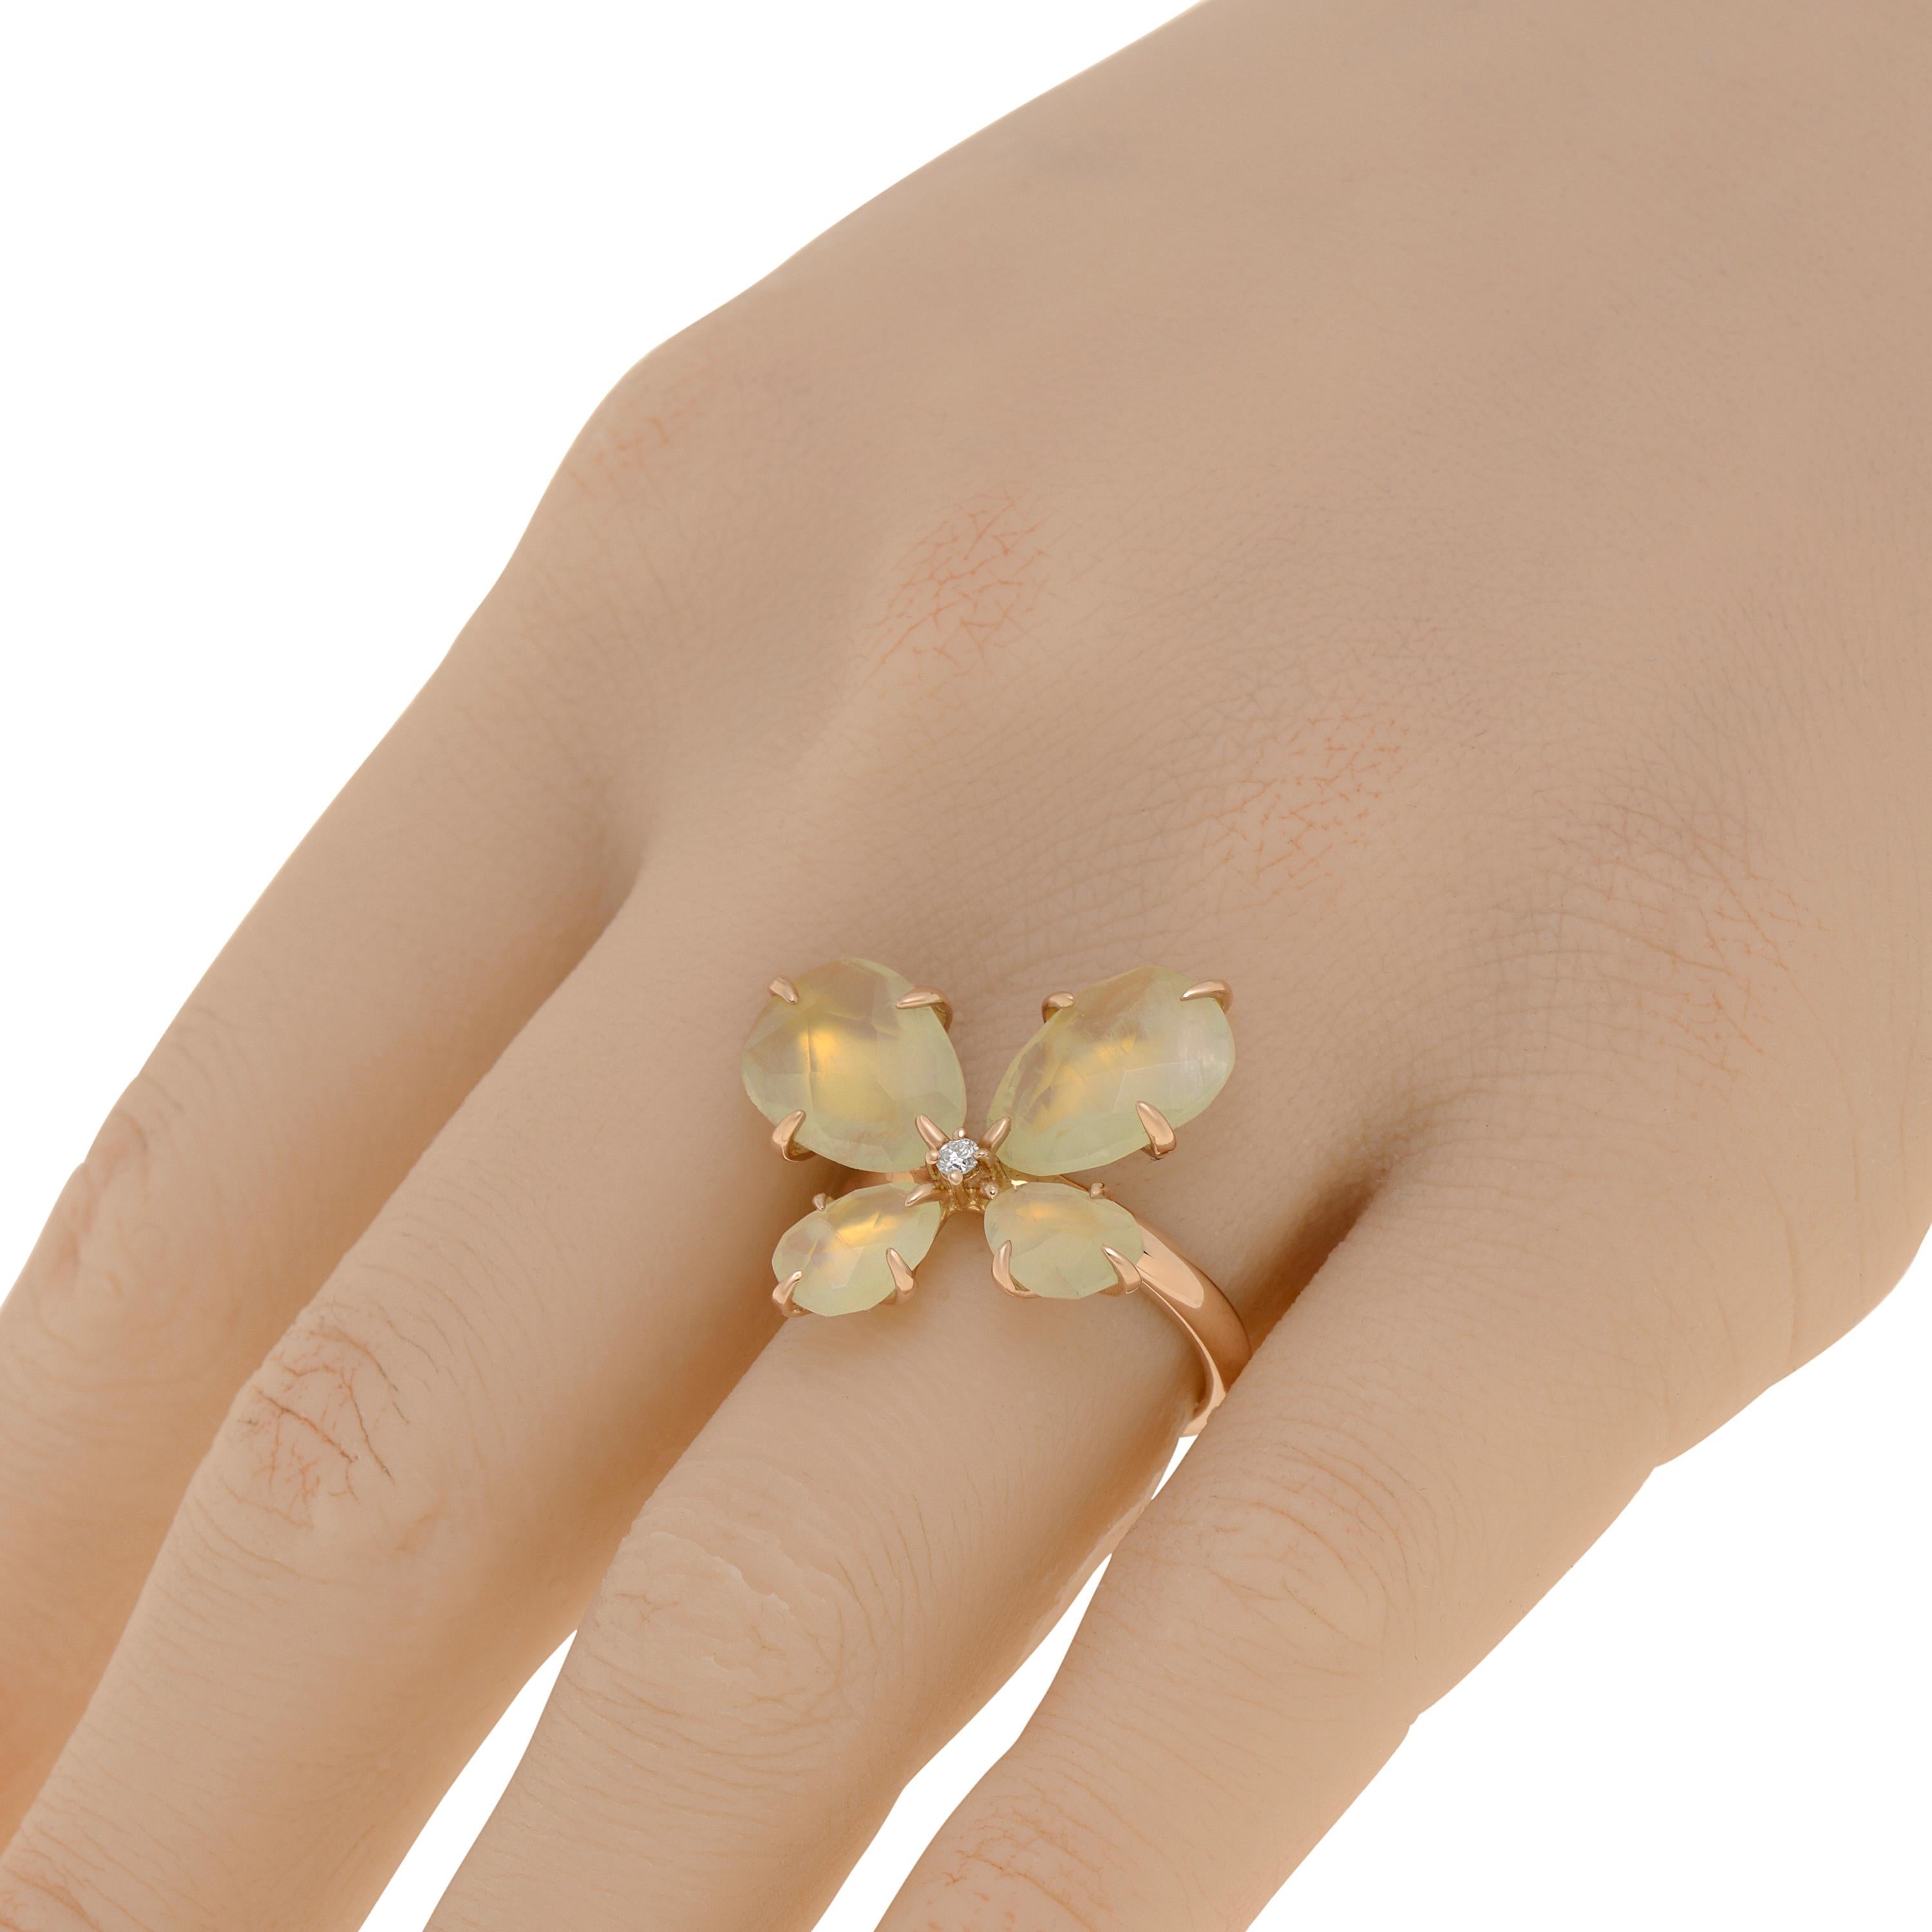 Mimi Milano 18K rose gold statement ring features an adorable butterfly design with 0.04ct. tw. diamonds and prehnite stones. The ring size is 6.25 (53). The decoration size is 7/8